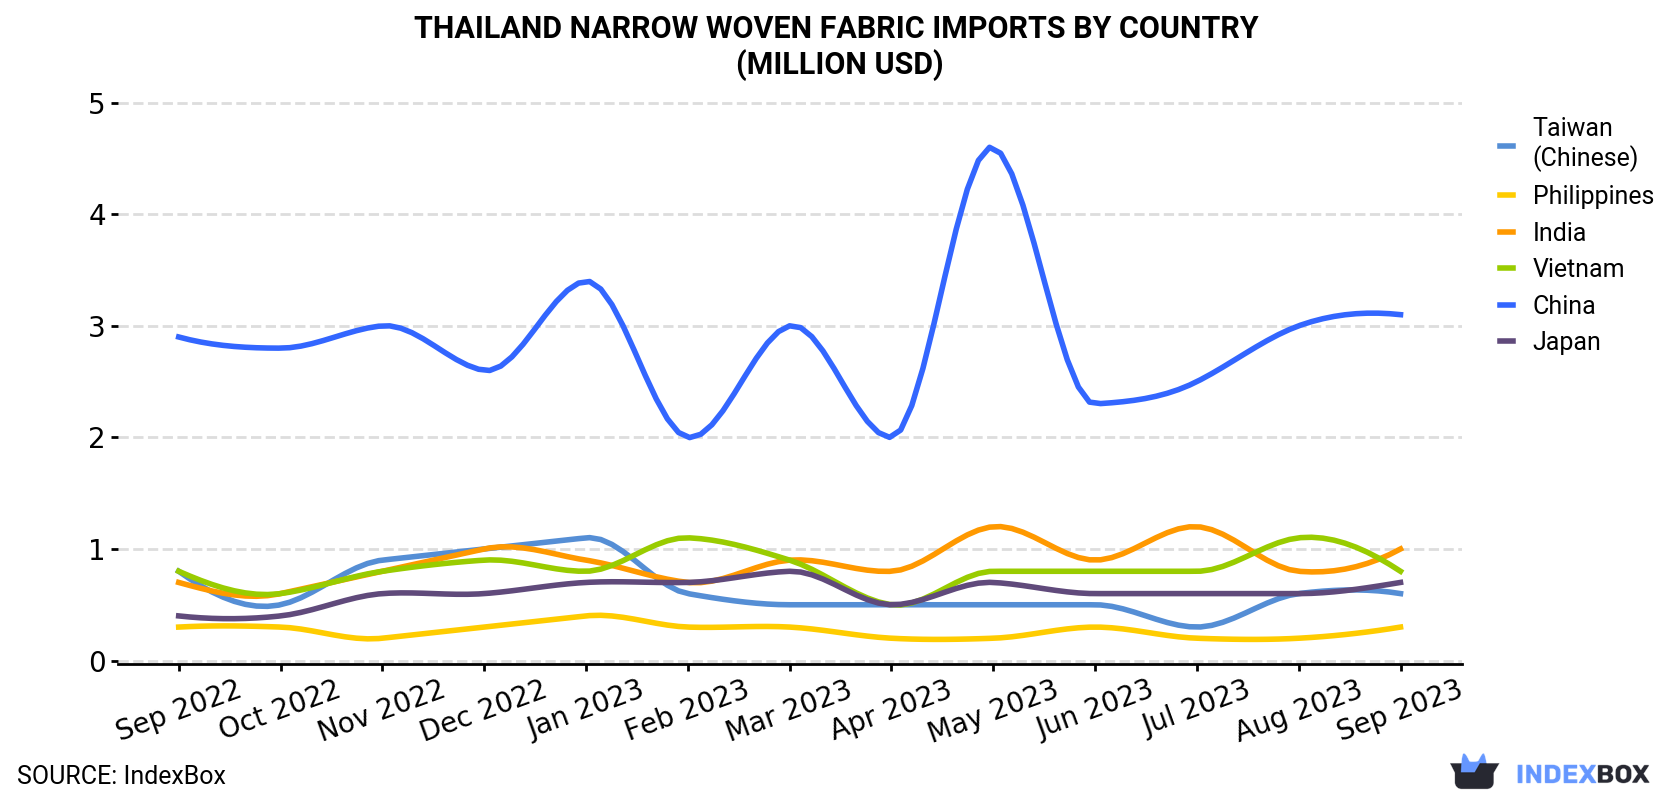 Thailand Narrow Woven Fabric Imports By Country (Million USD)